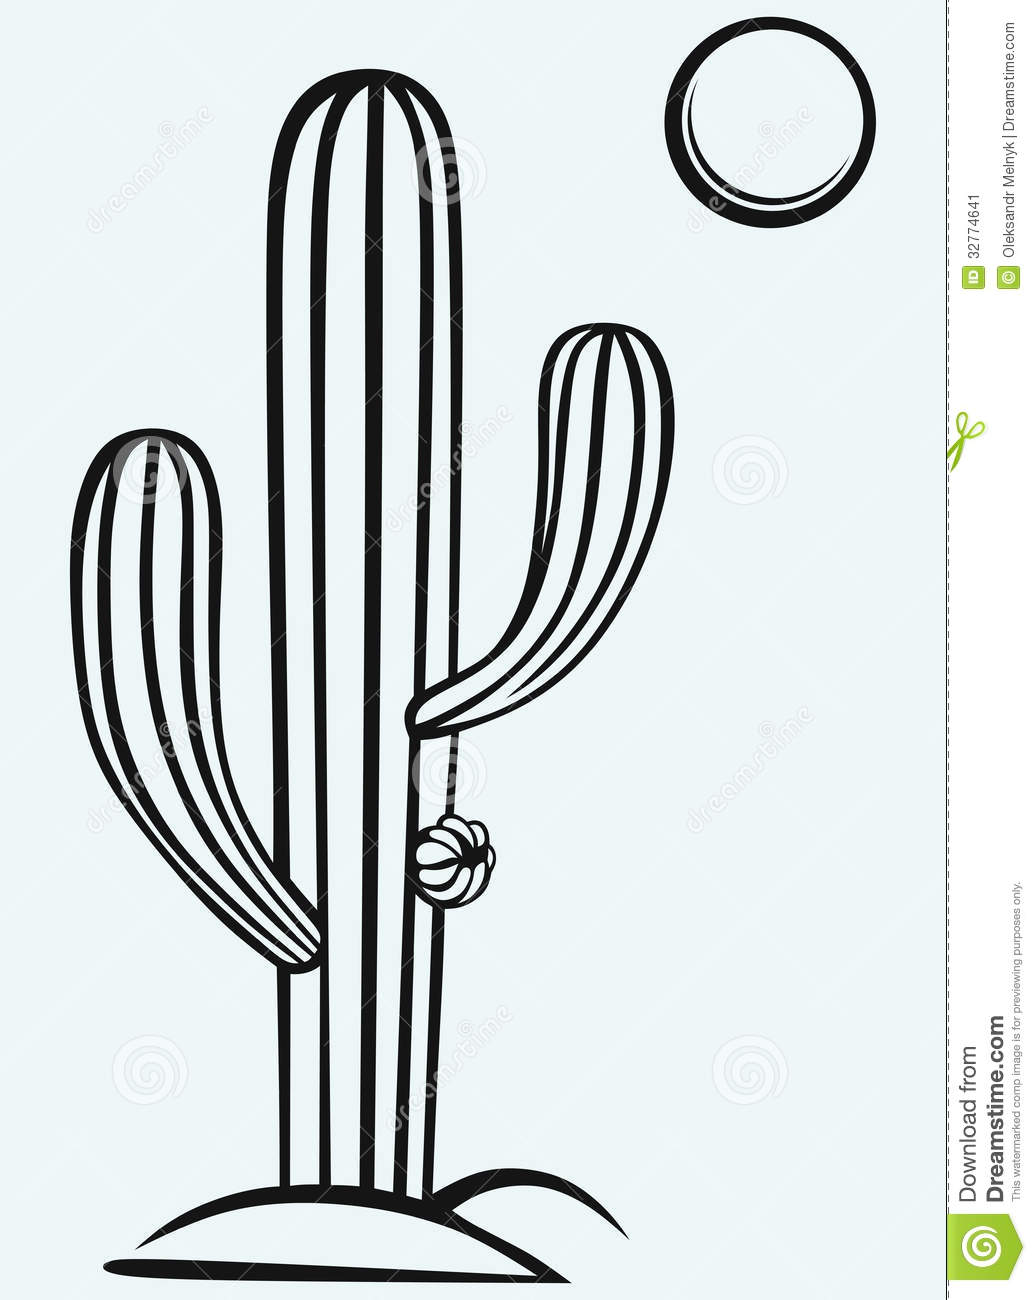 Cactus Clipart Black And White Cactus Cartoon Isolated On